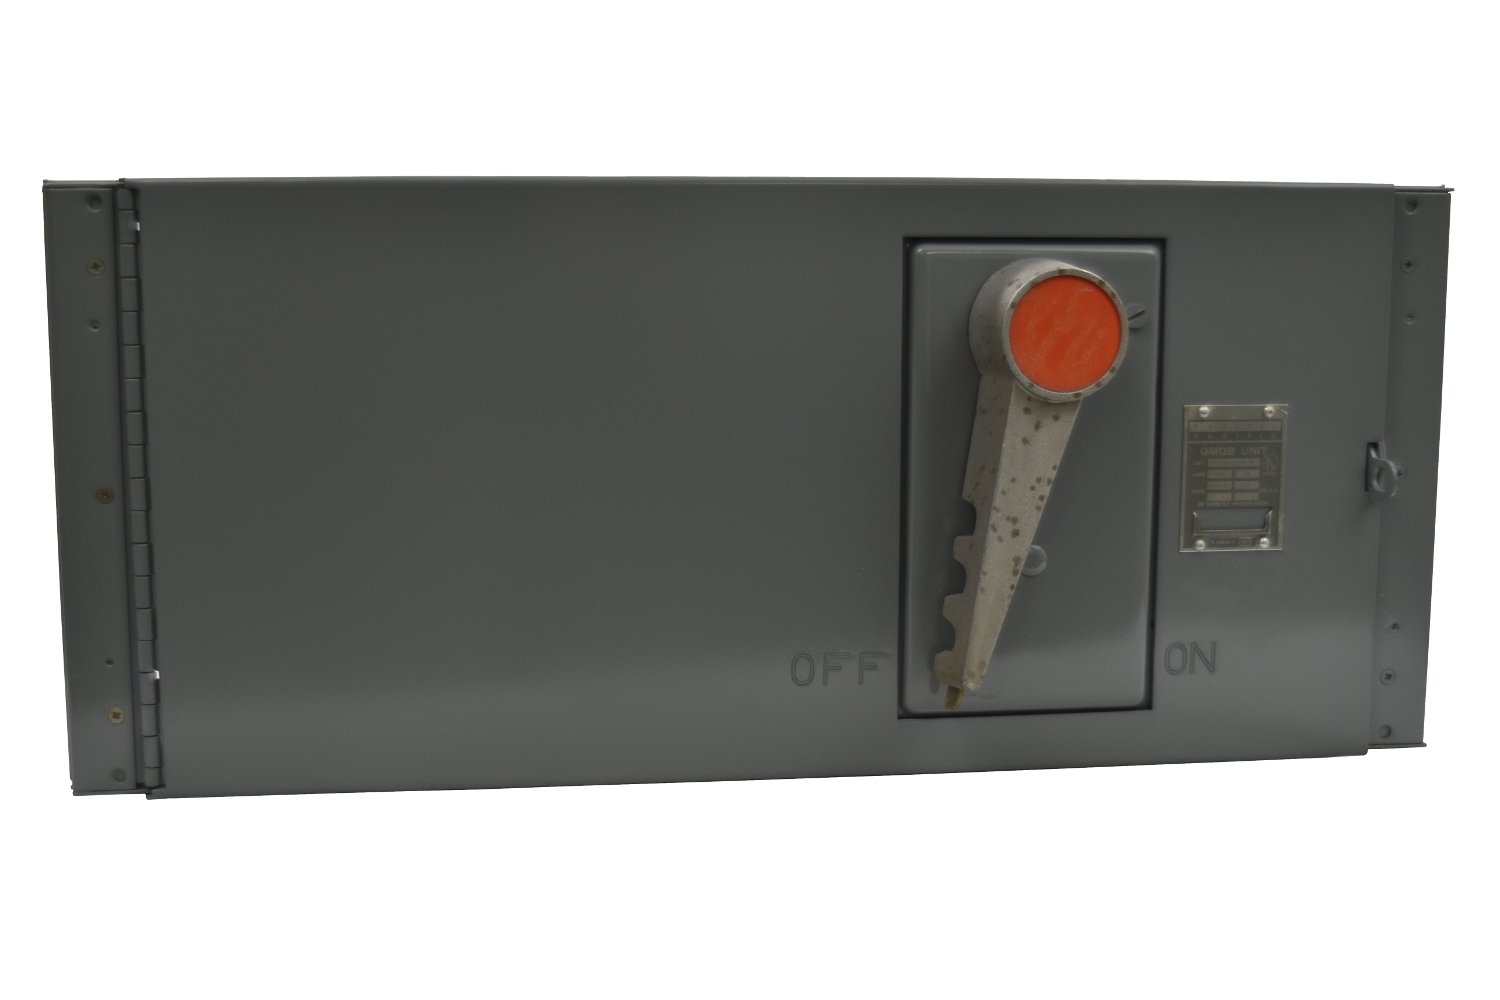 Federal Pacific QMQB2036R Panelboard, Panel Mount Switch: 200 Amp, 600 Volt, 3 Pole